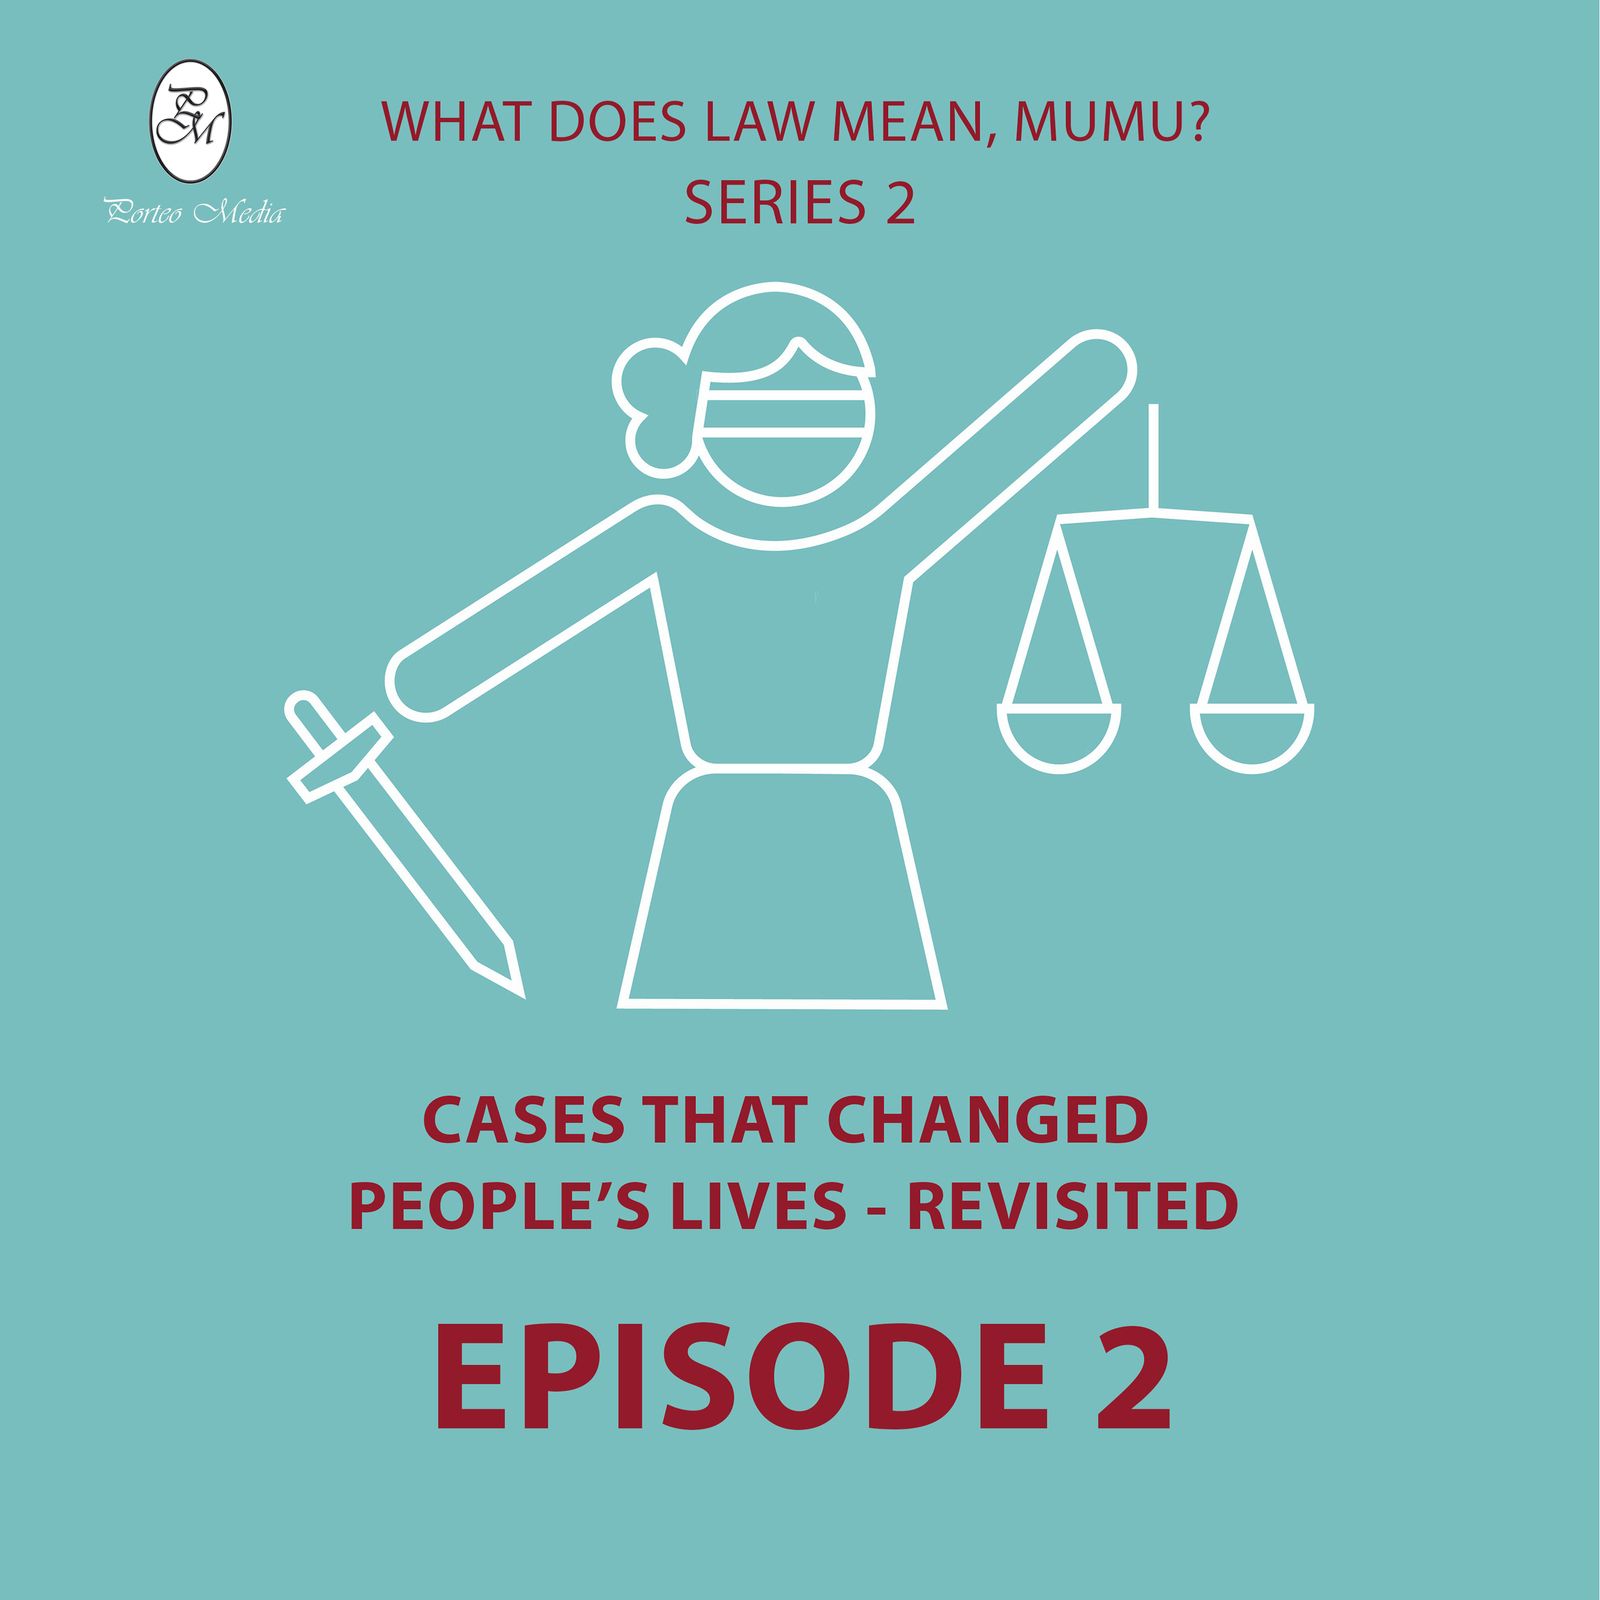 S2 Ep2: Episode 2. Cases That Changed People's Lives - Revisited: the "Mc Gee Case"